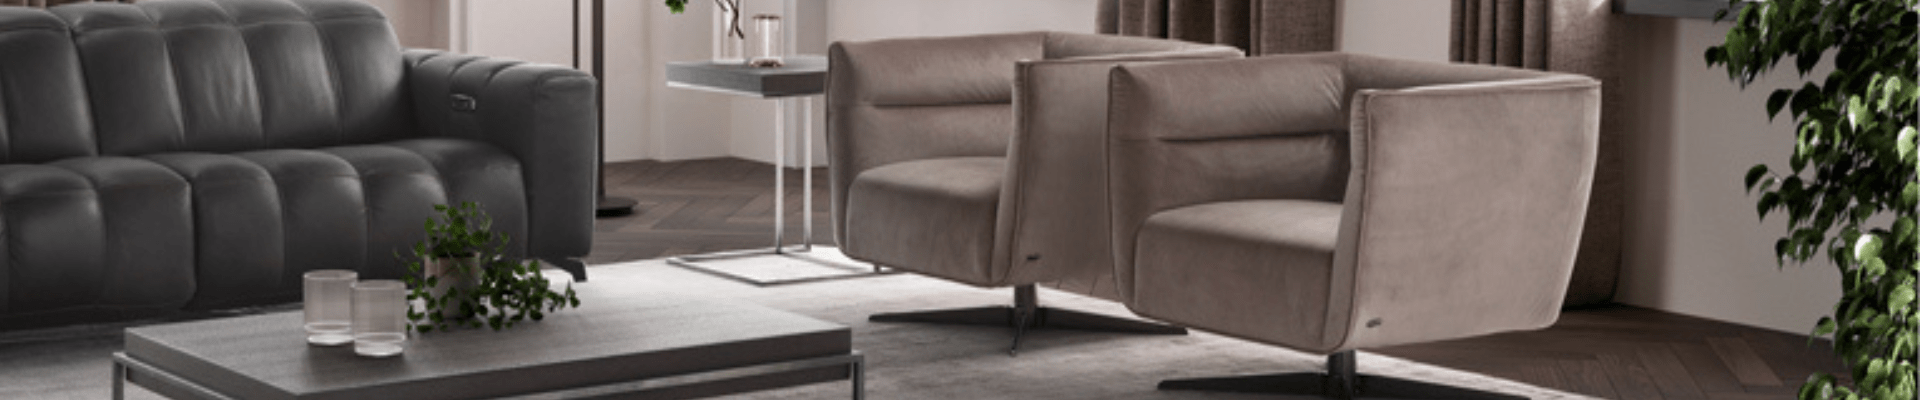 Natuzzi Editions Chair Collections Banner